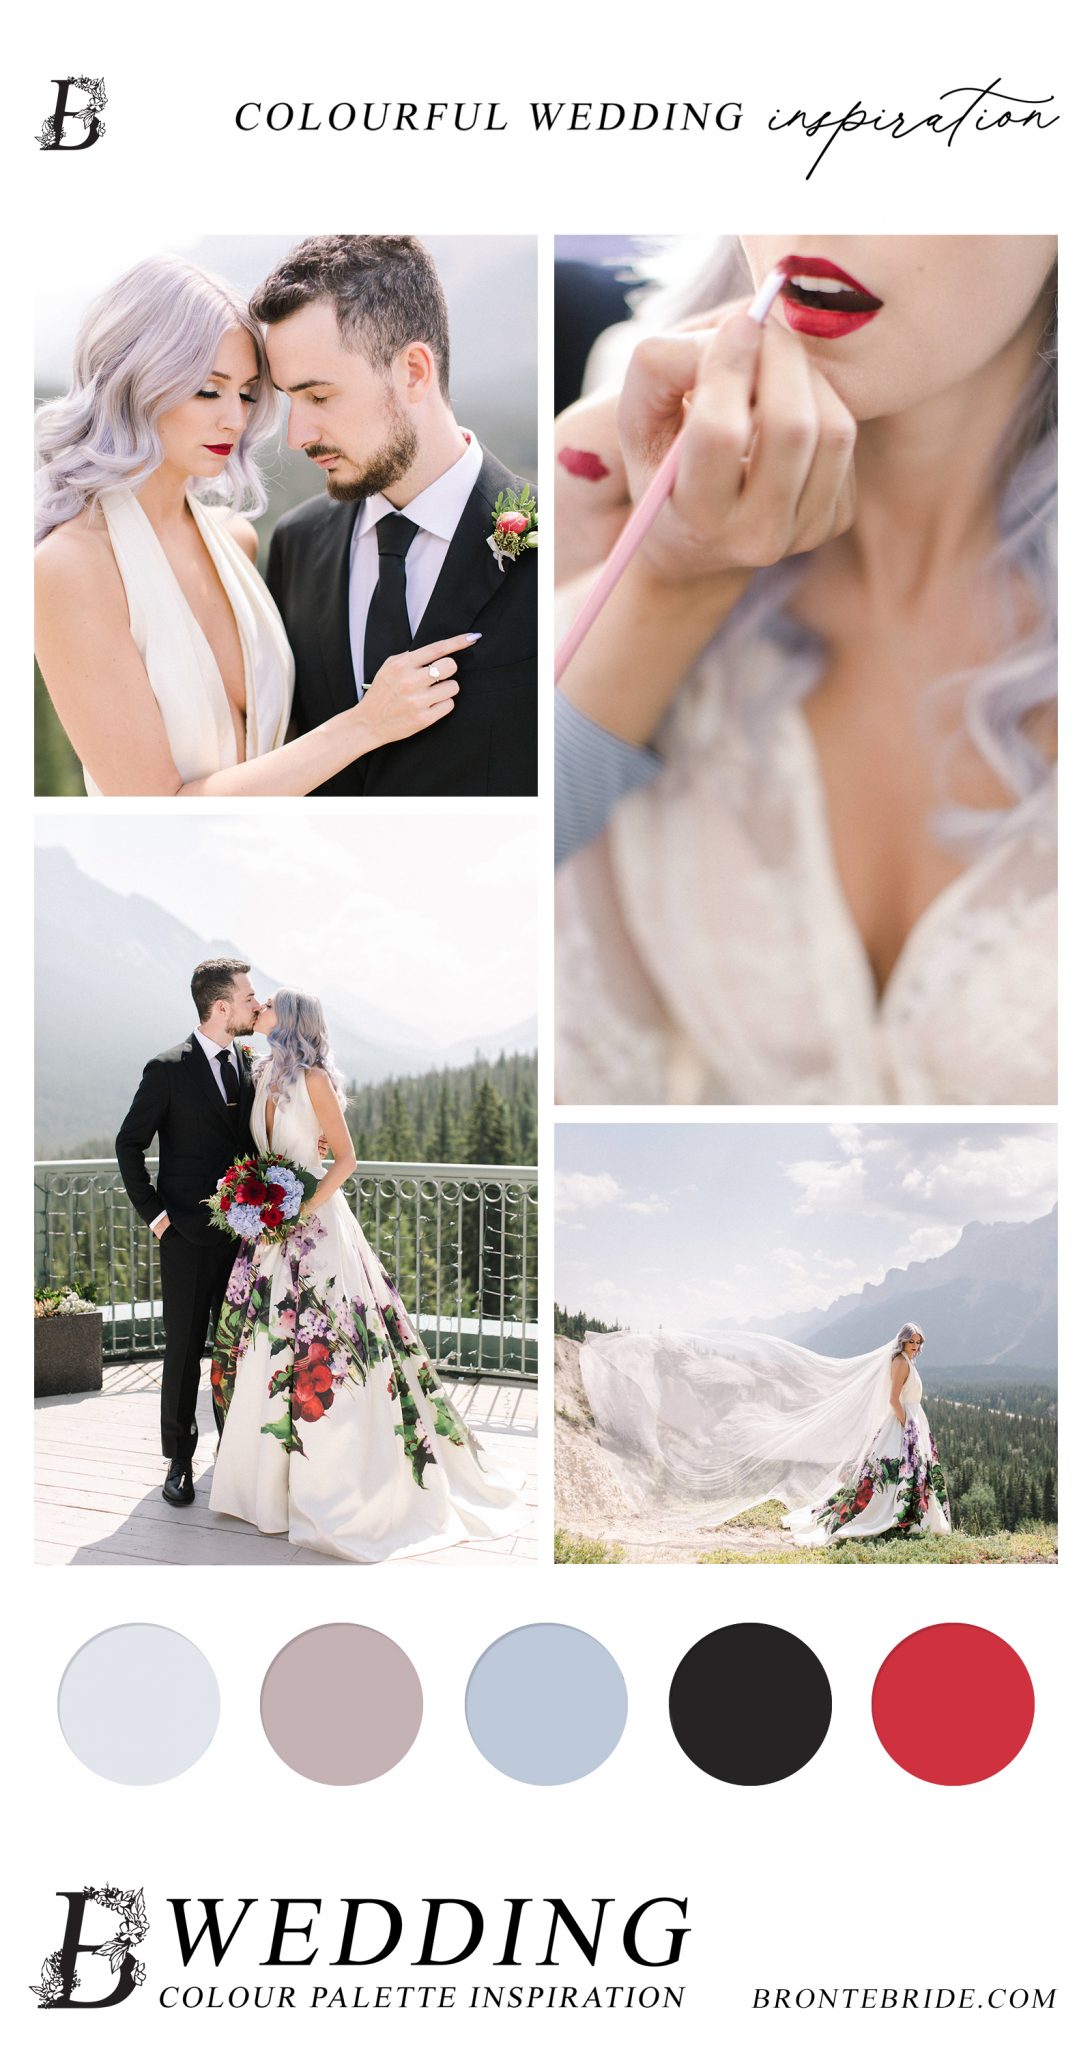 Modern Wedding Colour Palette Inspiration - This Bride's Colourful Wedding Dress Will Have You Swooning at This Non-Traditional RimRock Resort Wedding in Banff